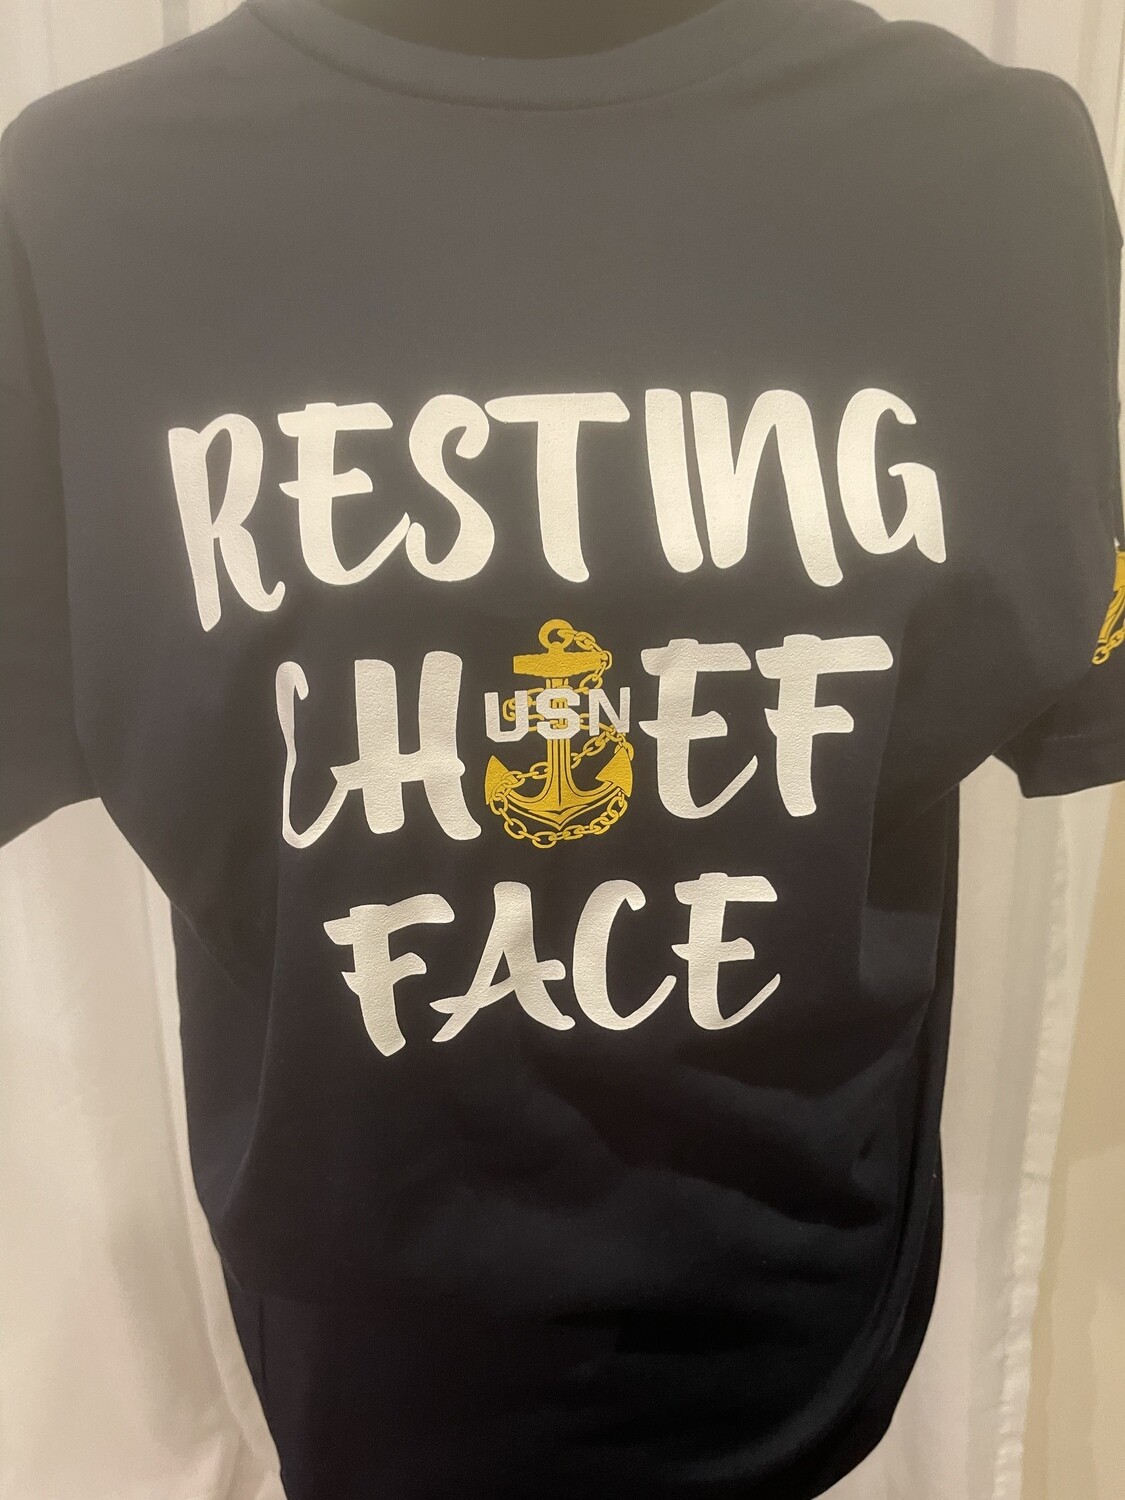 ❤️ $20.00 Short-Sleeve “Resting Chief Face” Crew Neck T-Shirt⭐️ Takes approx 5-7 days to ship from date of order.) *SHIPPING INCLUDED IN PRICE.⭐️